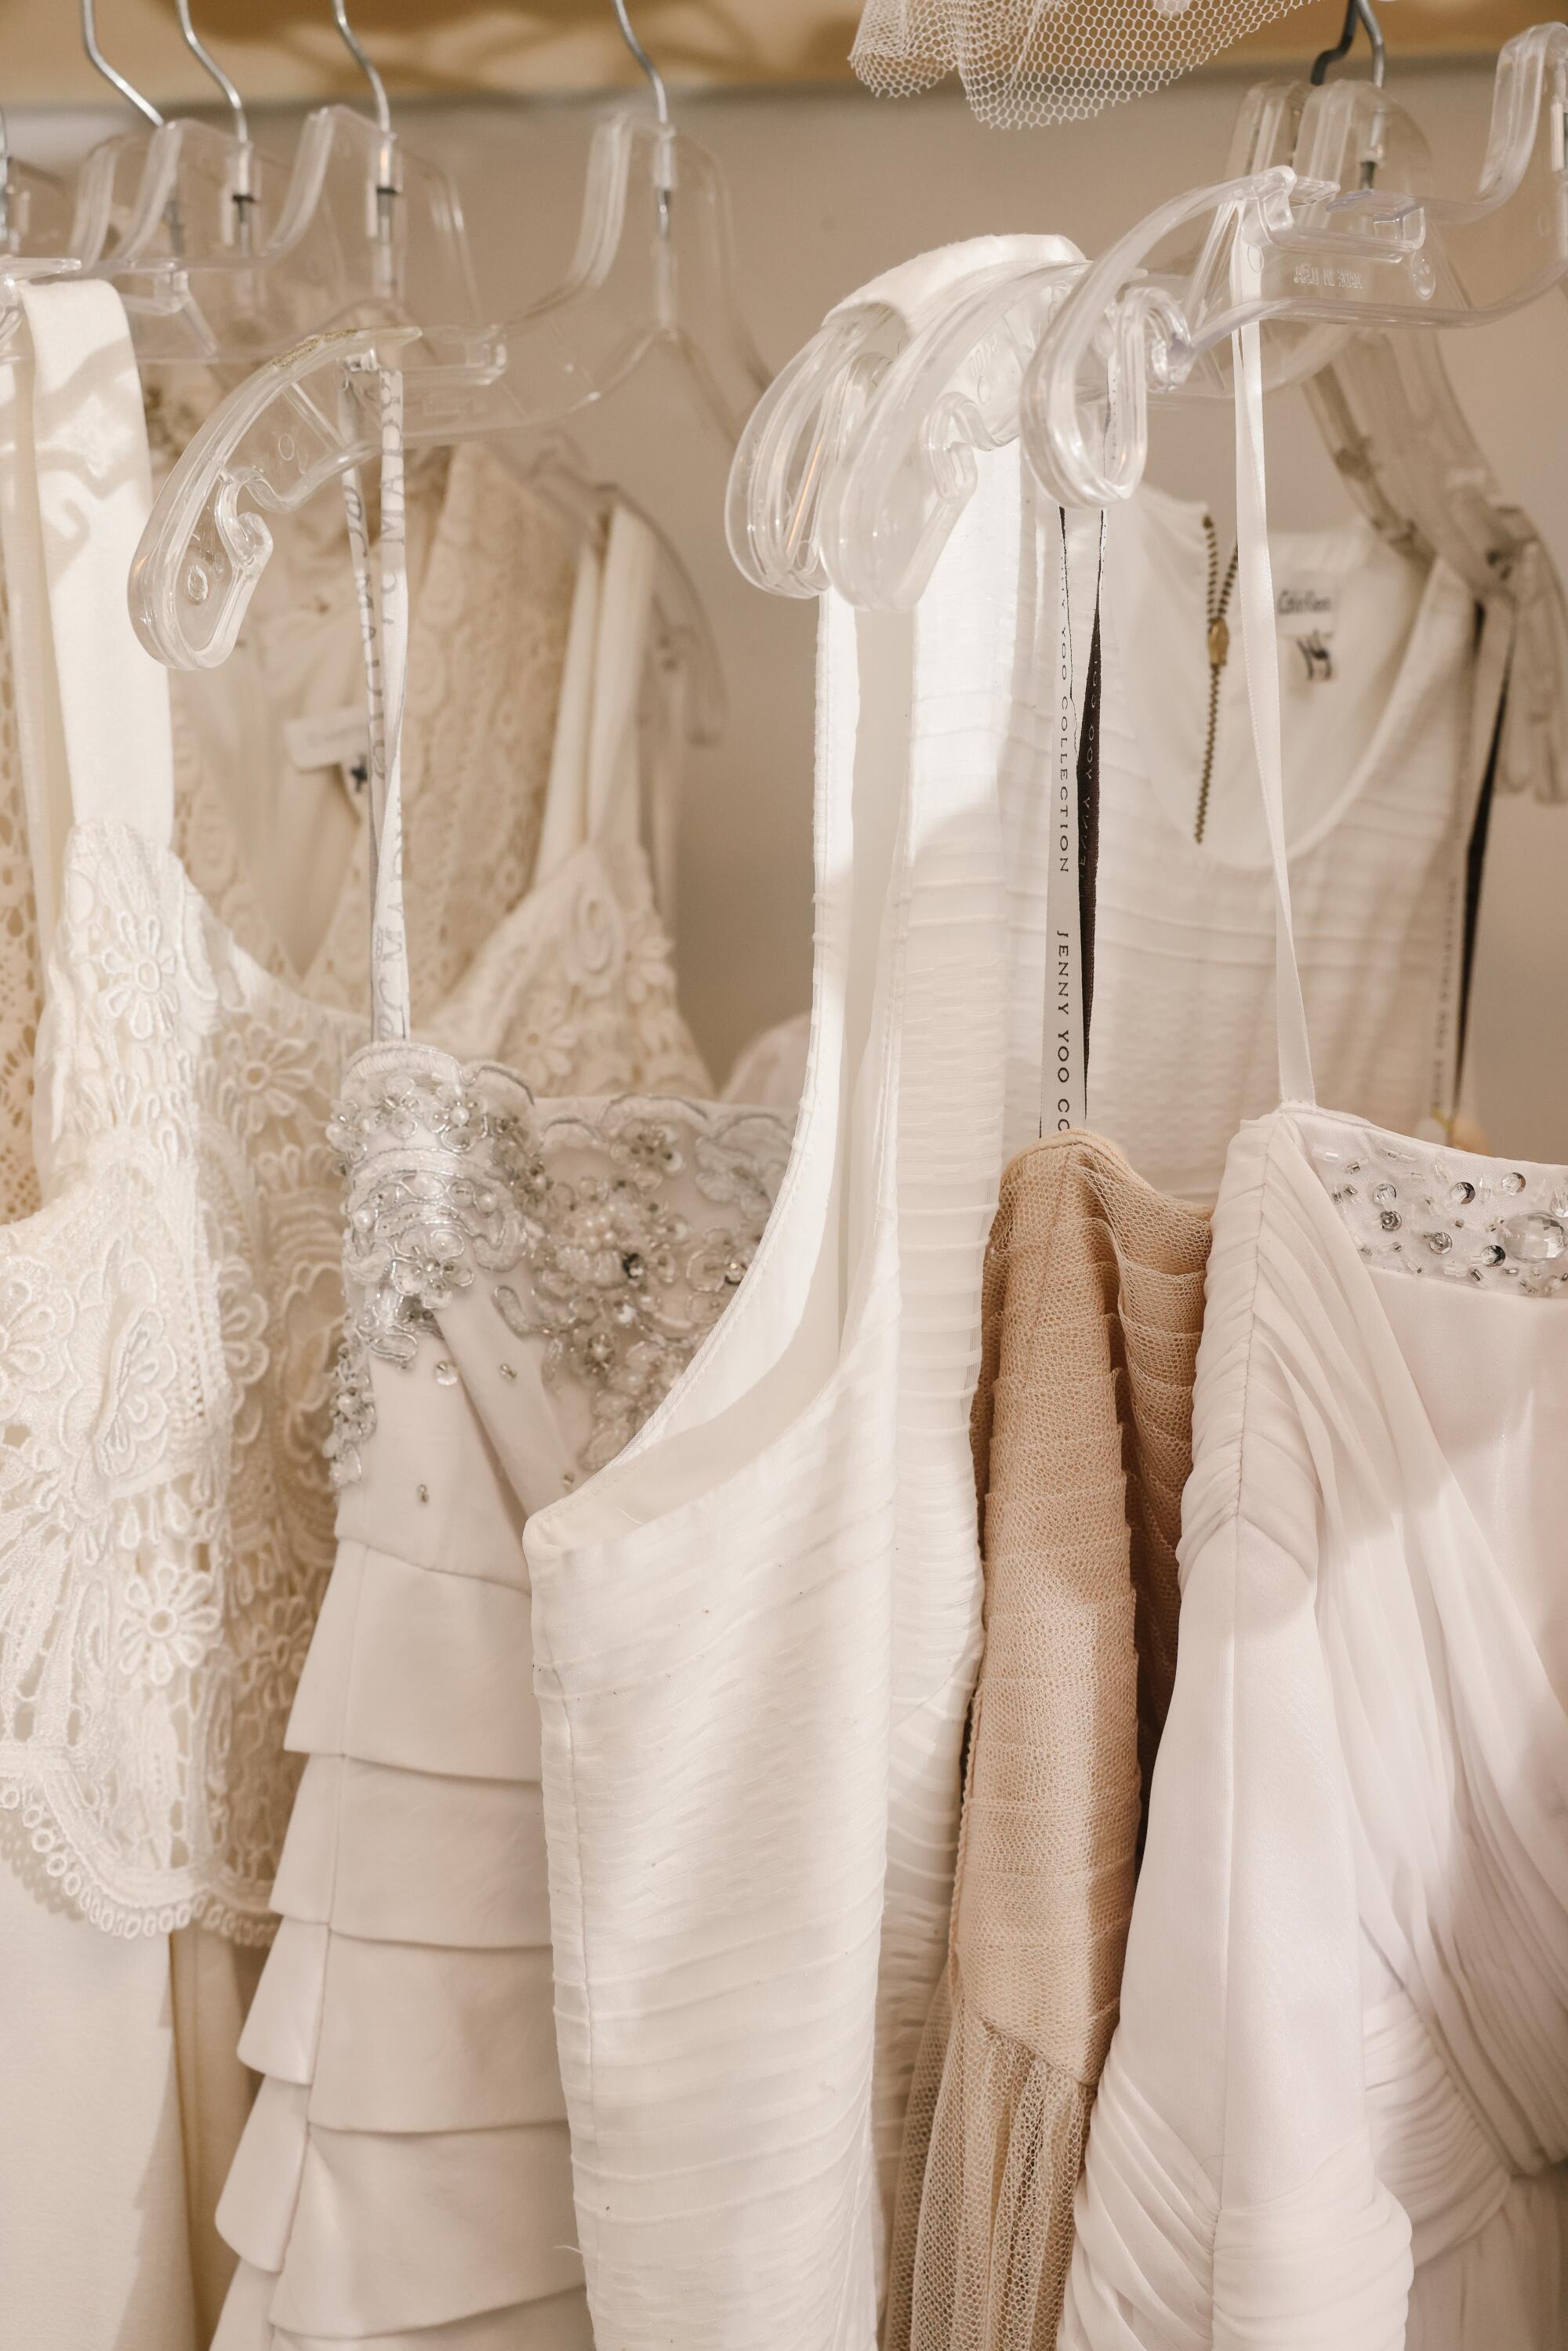 Wedding gowns hang in a bridal suite 